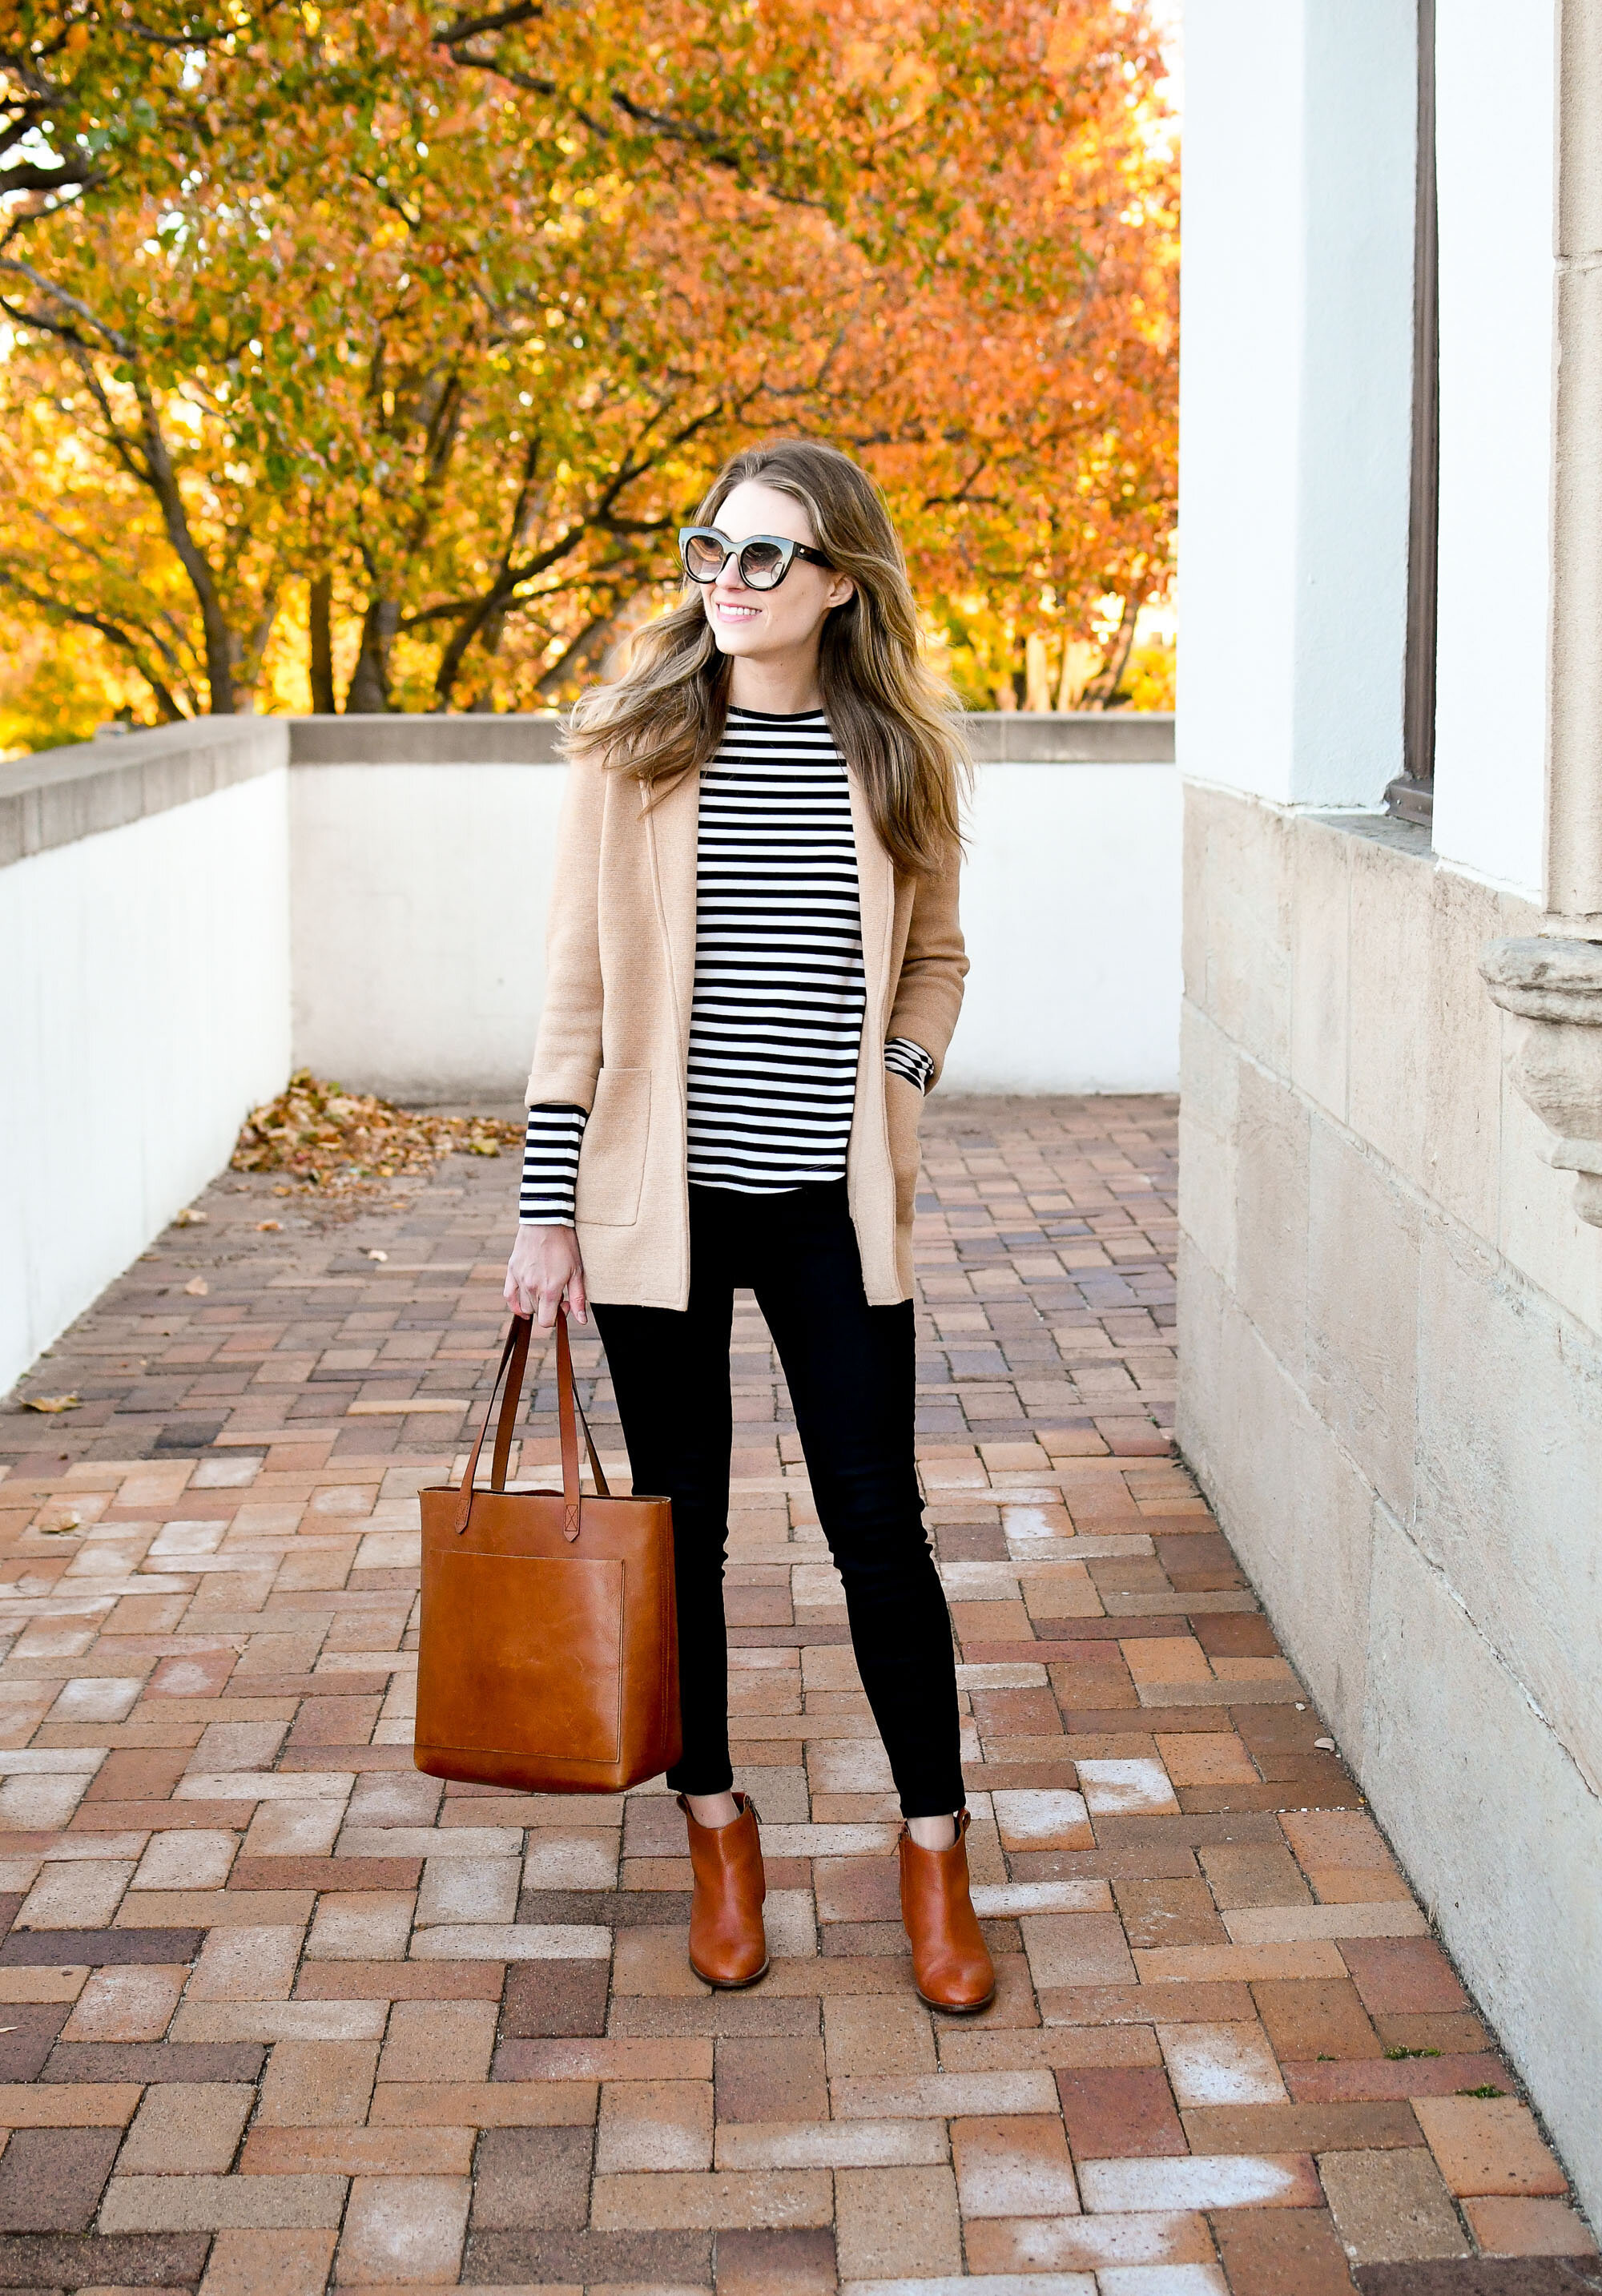 Favorite outfit: A uniform to fall back on — Cotton Cashmere Cat Hair